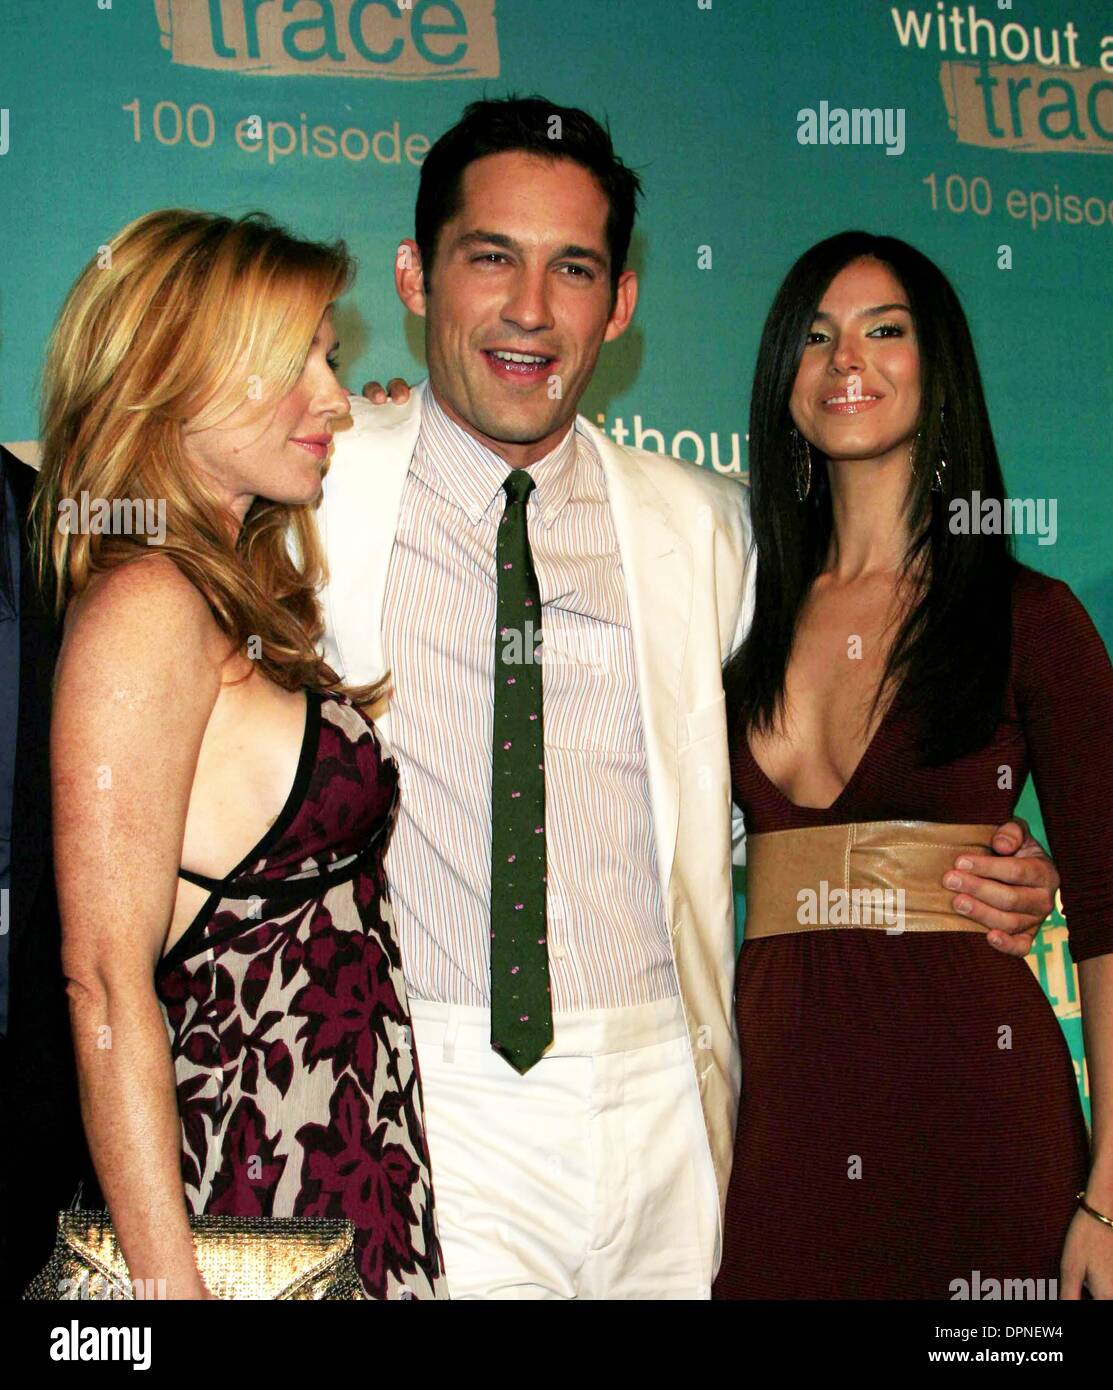 Sept. 9, 2006 - Hollywood, CALIFORNIA, USA - POPPY MONTGOMERY, ENRIQUE MURCIANO AND ROSELYN SANCHEZ -.WITHOUT A TRACE 100TH EPISODE PARTY -.CABANA CLUB, HOLLYWOOD, CALIFORNIA - .09-09-2006 -. NINA PROMMER/   2006.K49298NP(Credit Image: © Globe Photos/ZUMAPRESS.com) Stock Photo